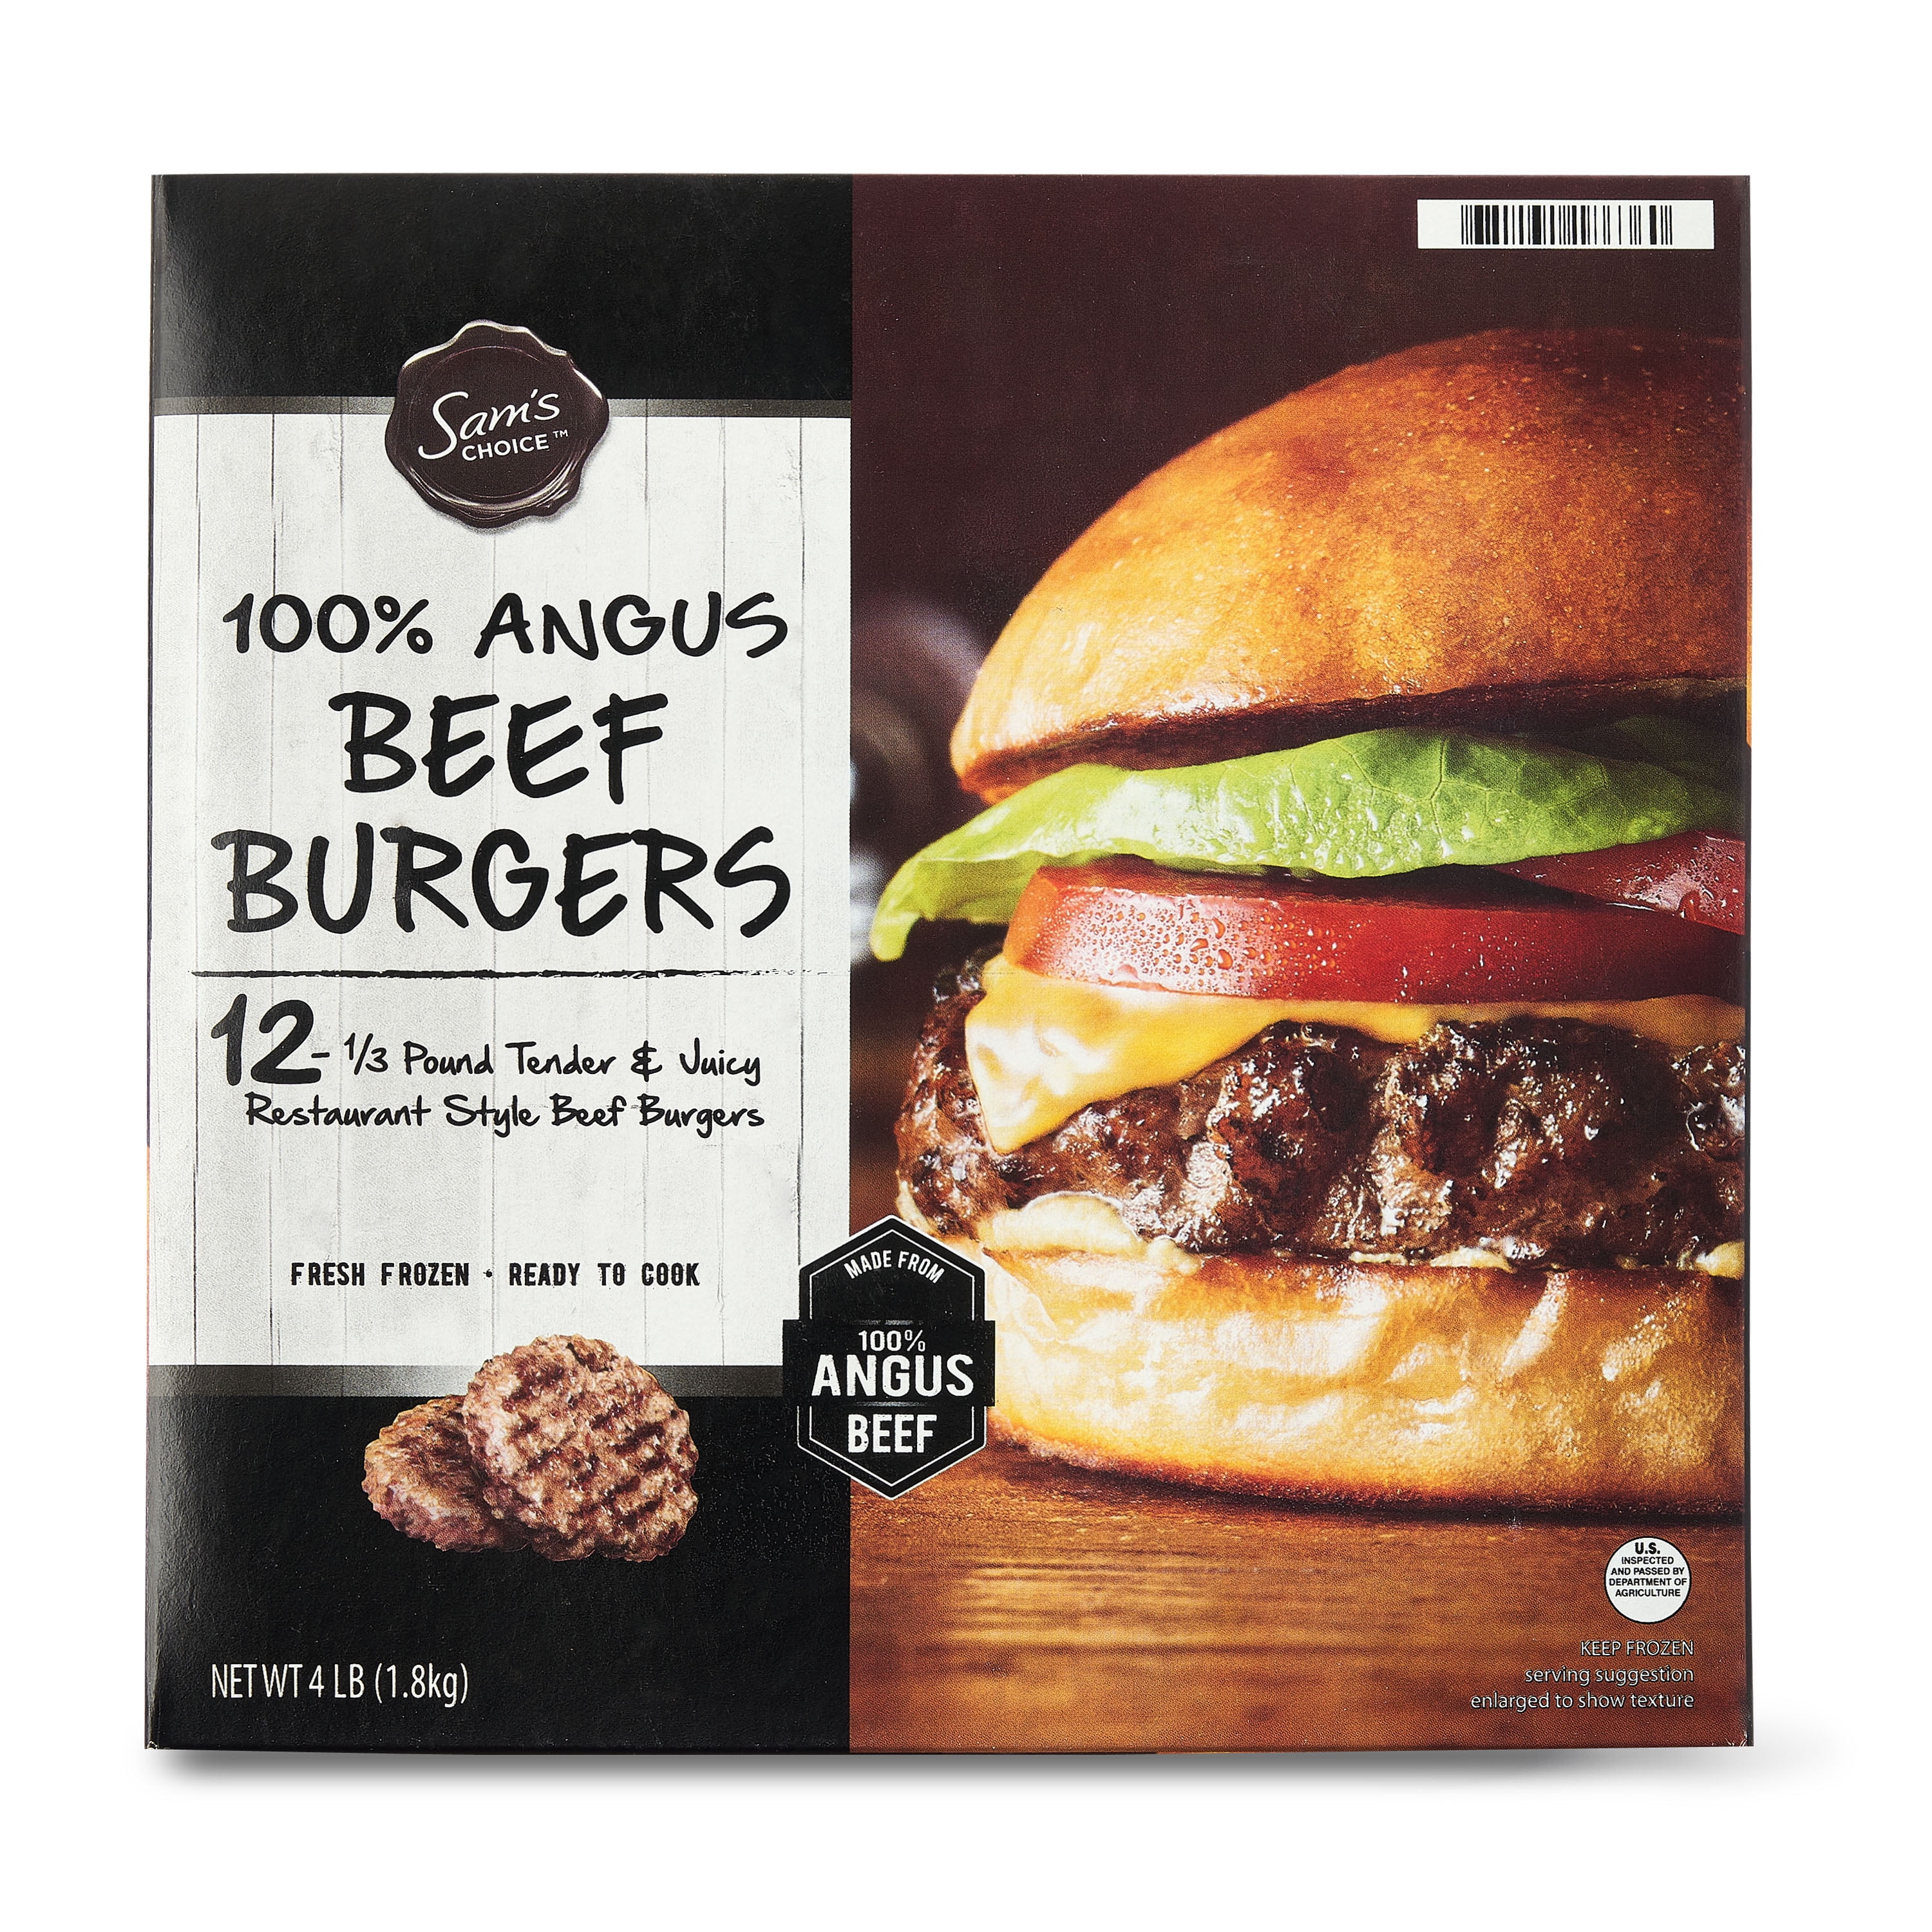 We Tested 5 Frozen Burgers, and This is The Best!